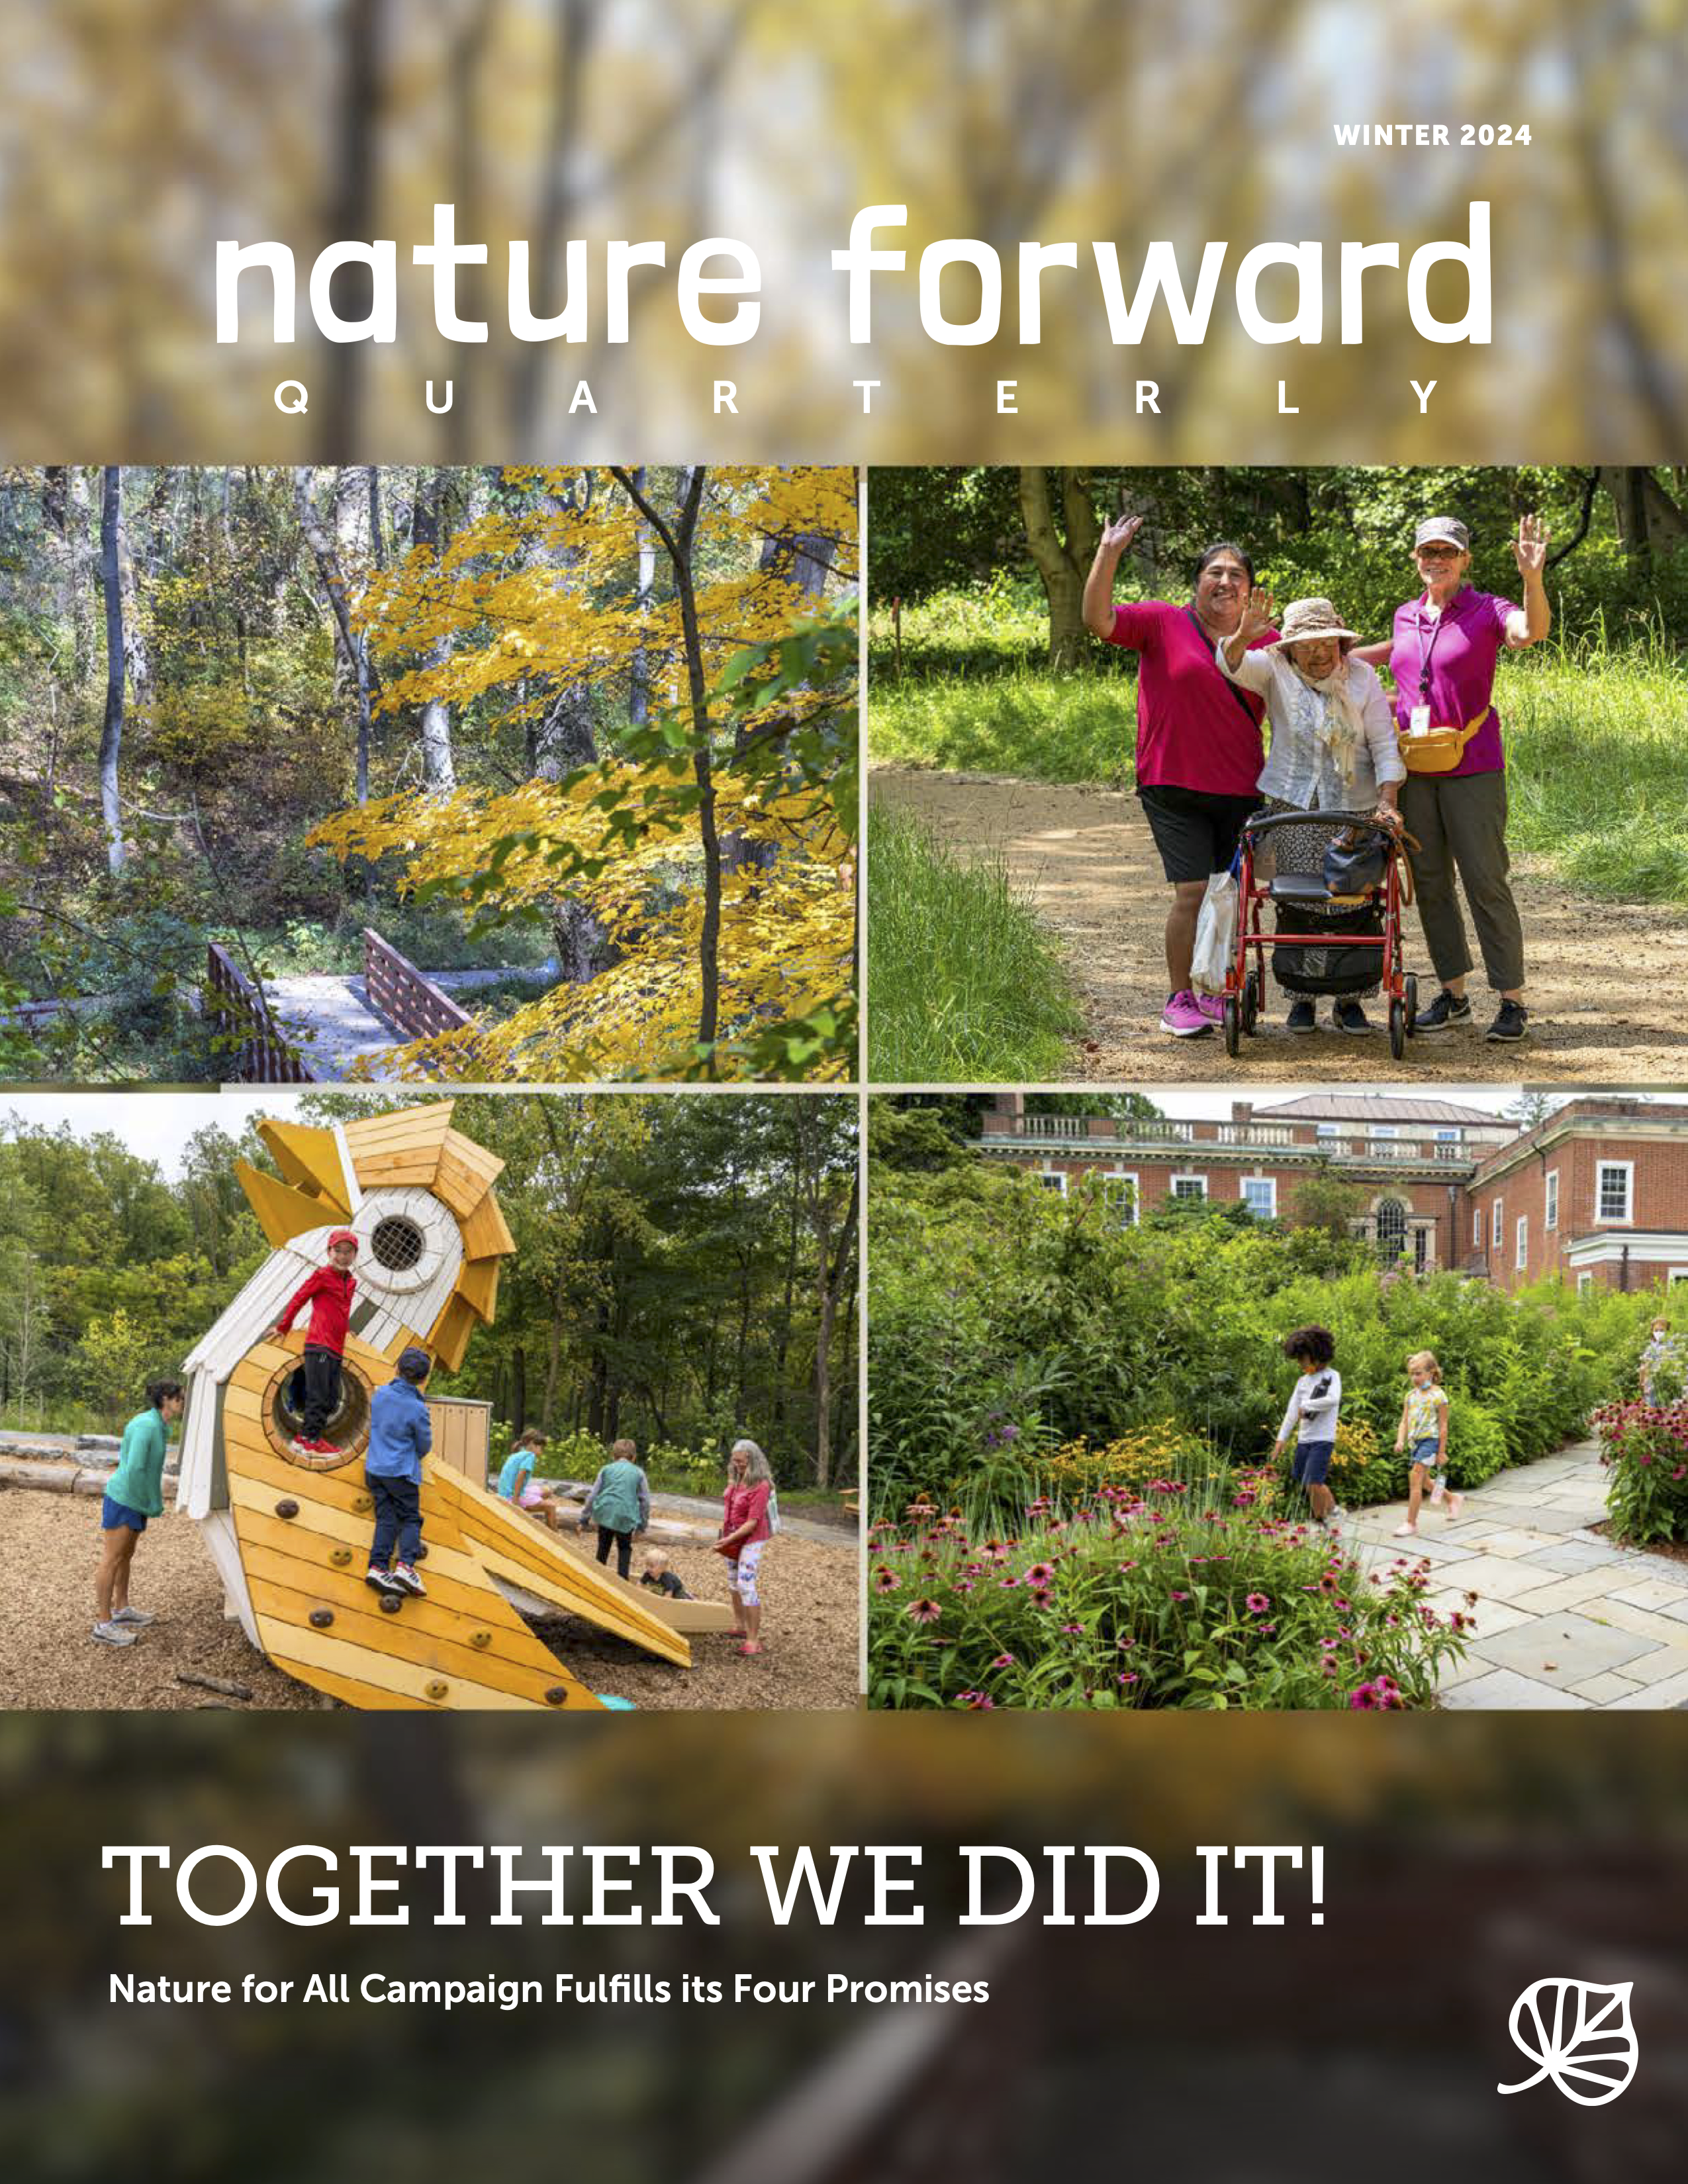 Cover of the Winter 2024 Nature Forward Quarterly illustrating the four phases of the Nature for All Campaign: Habitat Restoration, a Wheelchair-accessible trail; upgrades to Woodend Mansion; and an accessible Nature Play Space